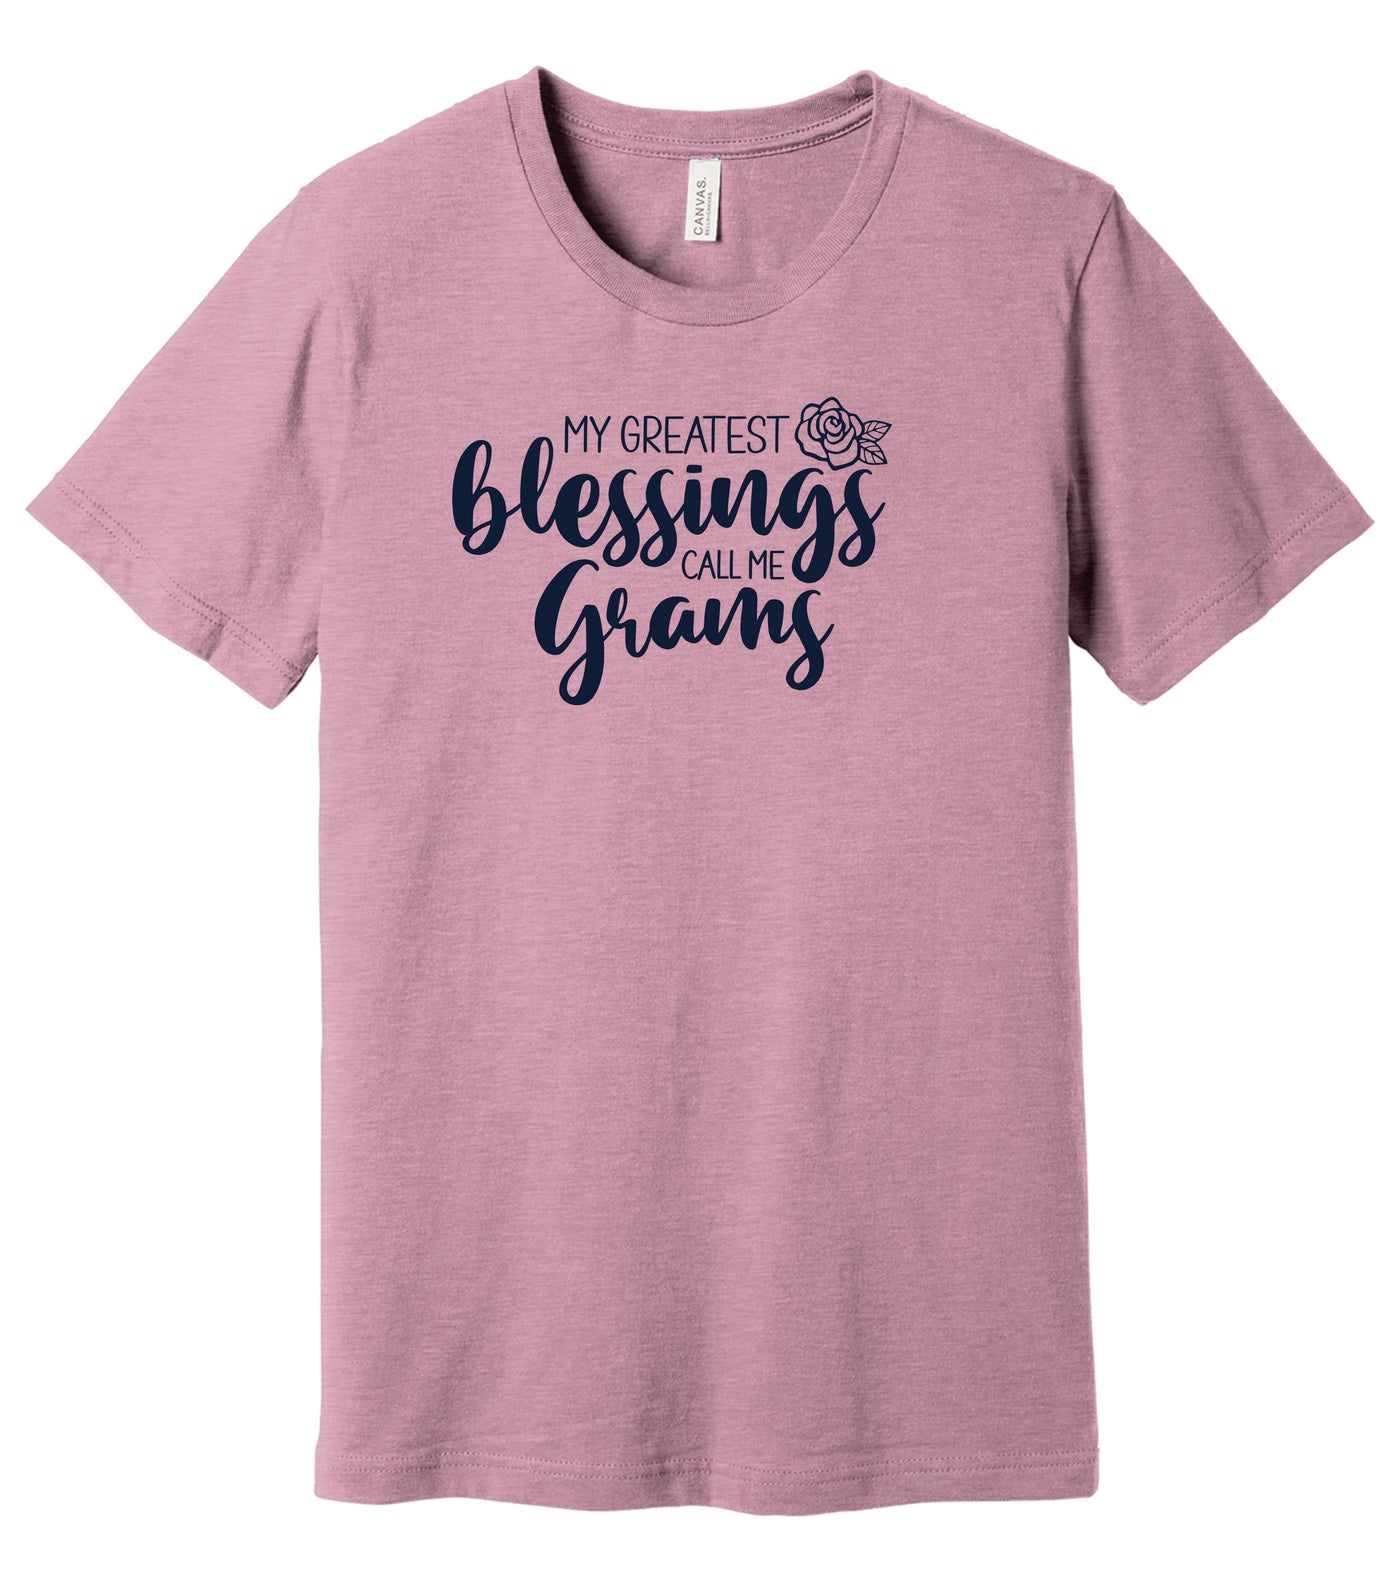 My Greatest Blessings Call Me Short-Sleeve Graphic T-shirt